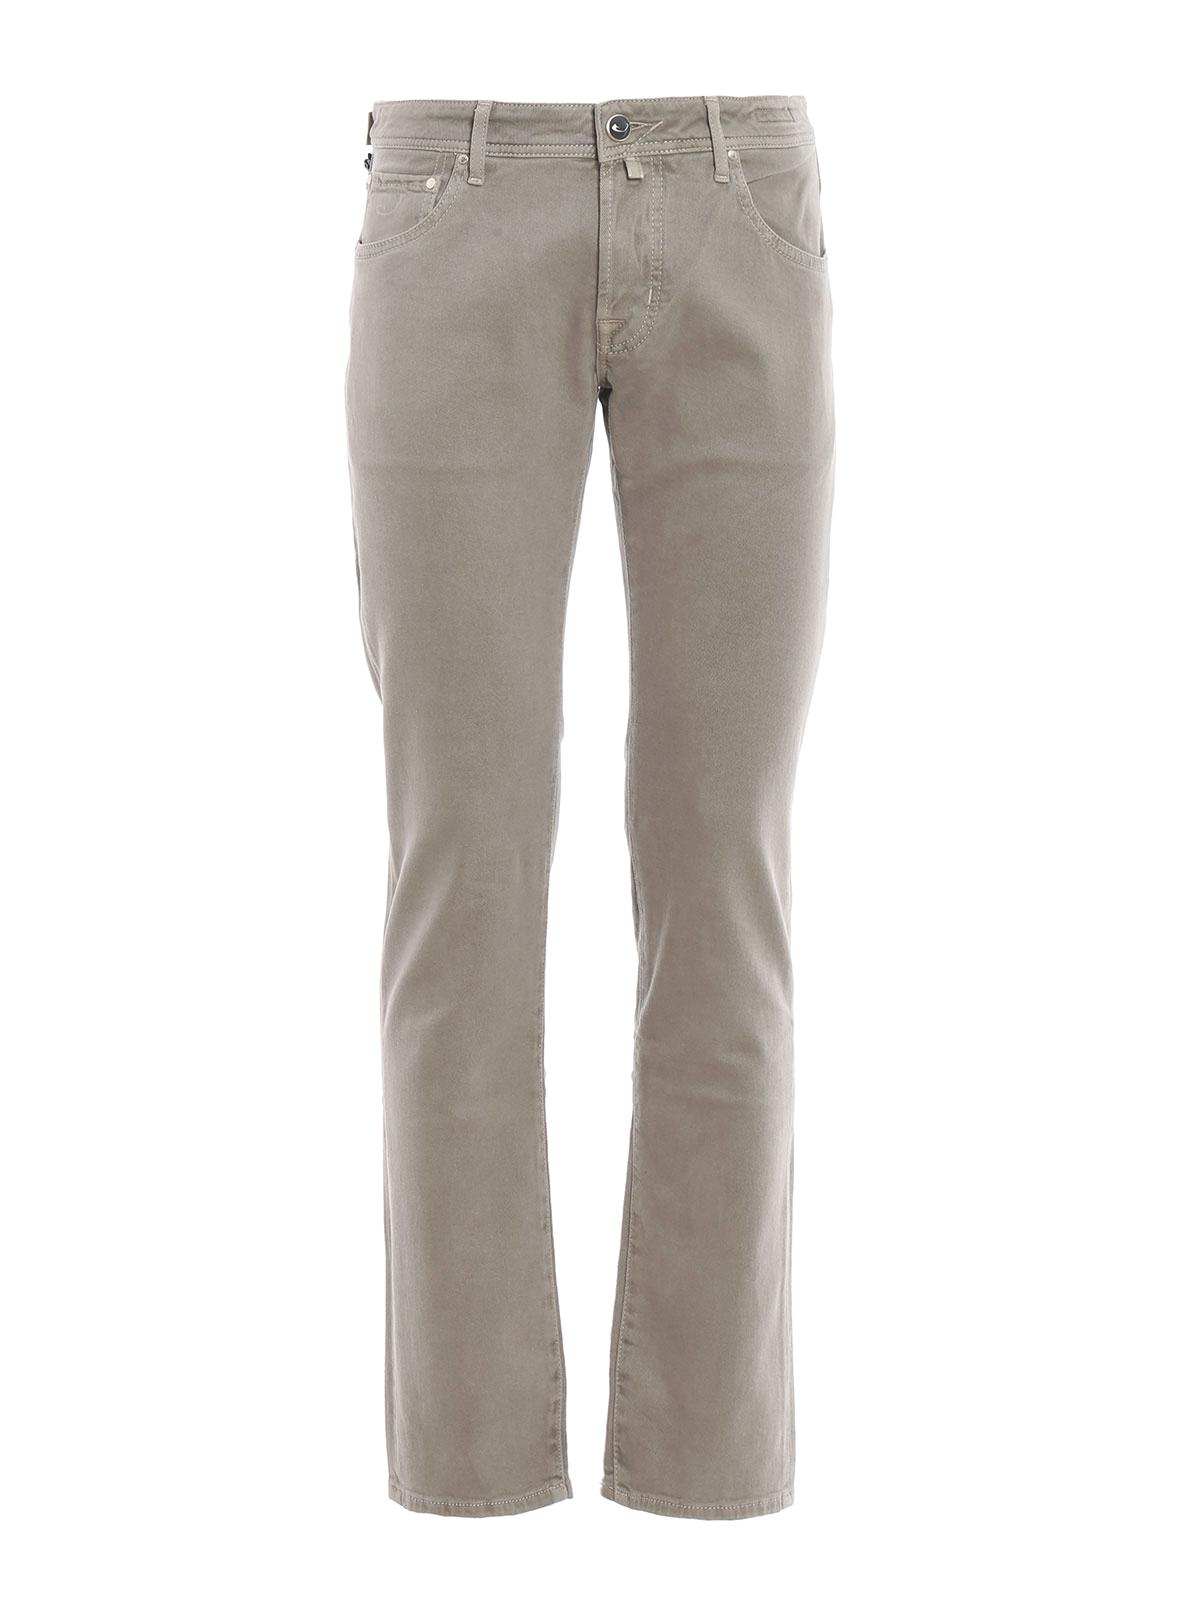 Jacob Cohen Denim Style 622 Grey Jeans in Gray - Lyst